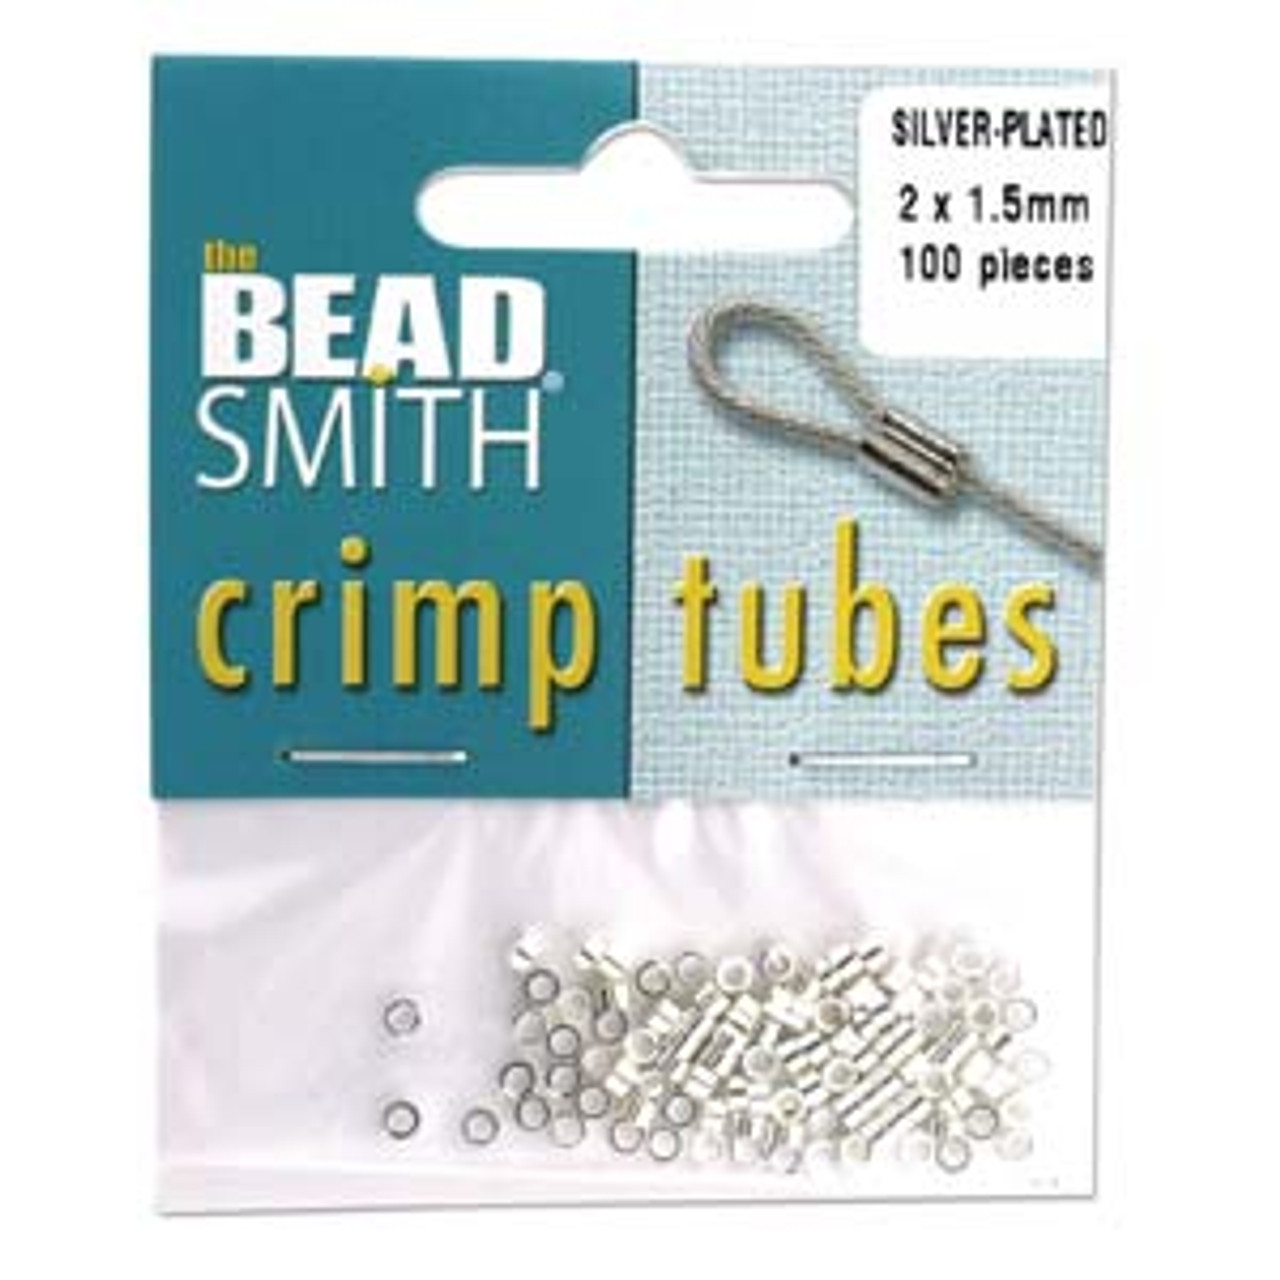 2x1.5mm Silver Plated Crimp Tubes (100 Pack)